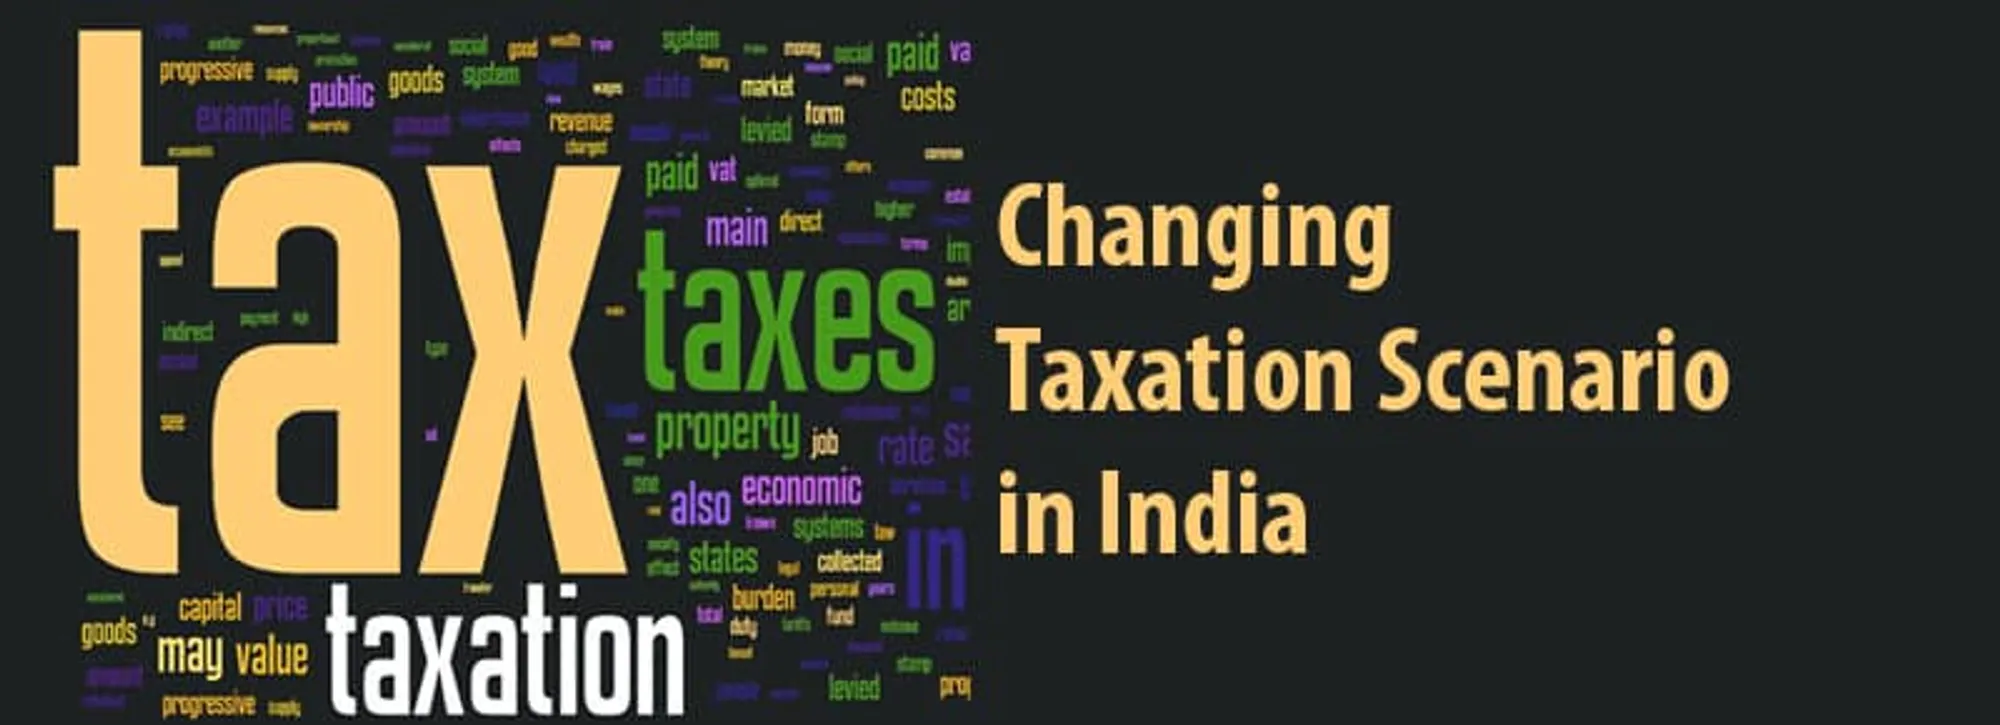 Demonetising _ The changing Taxation scenario in India